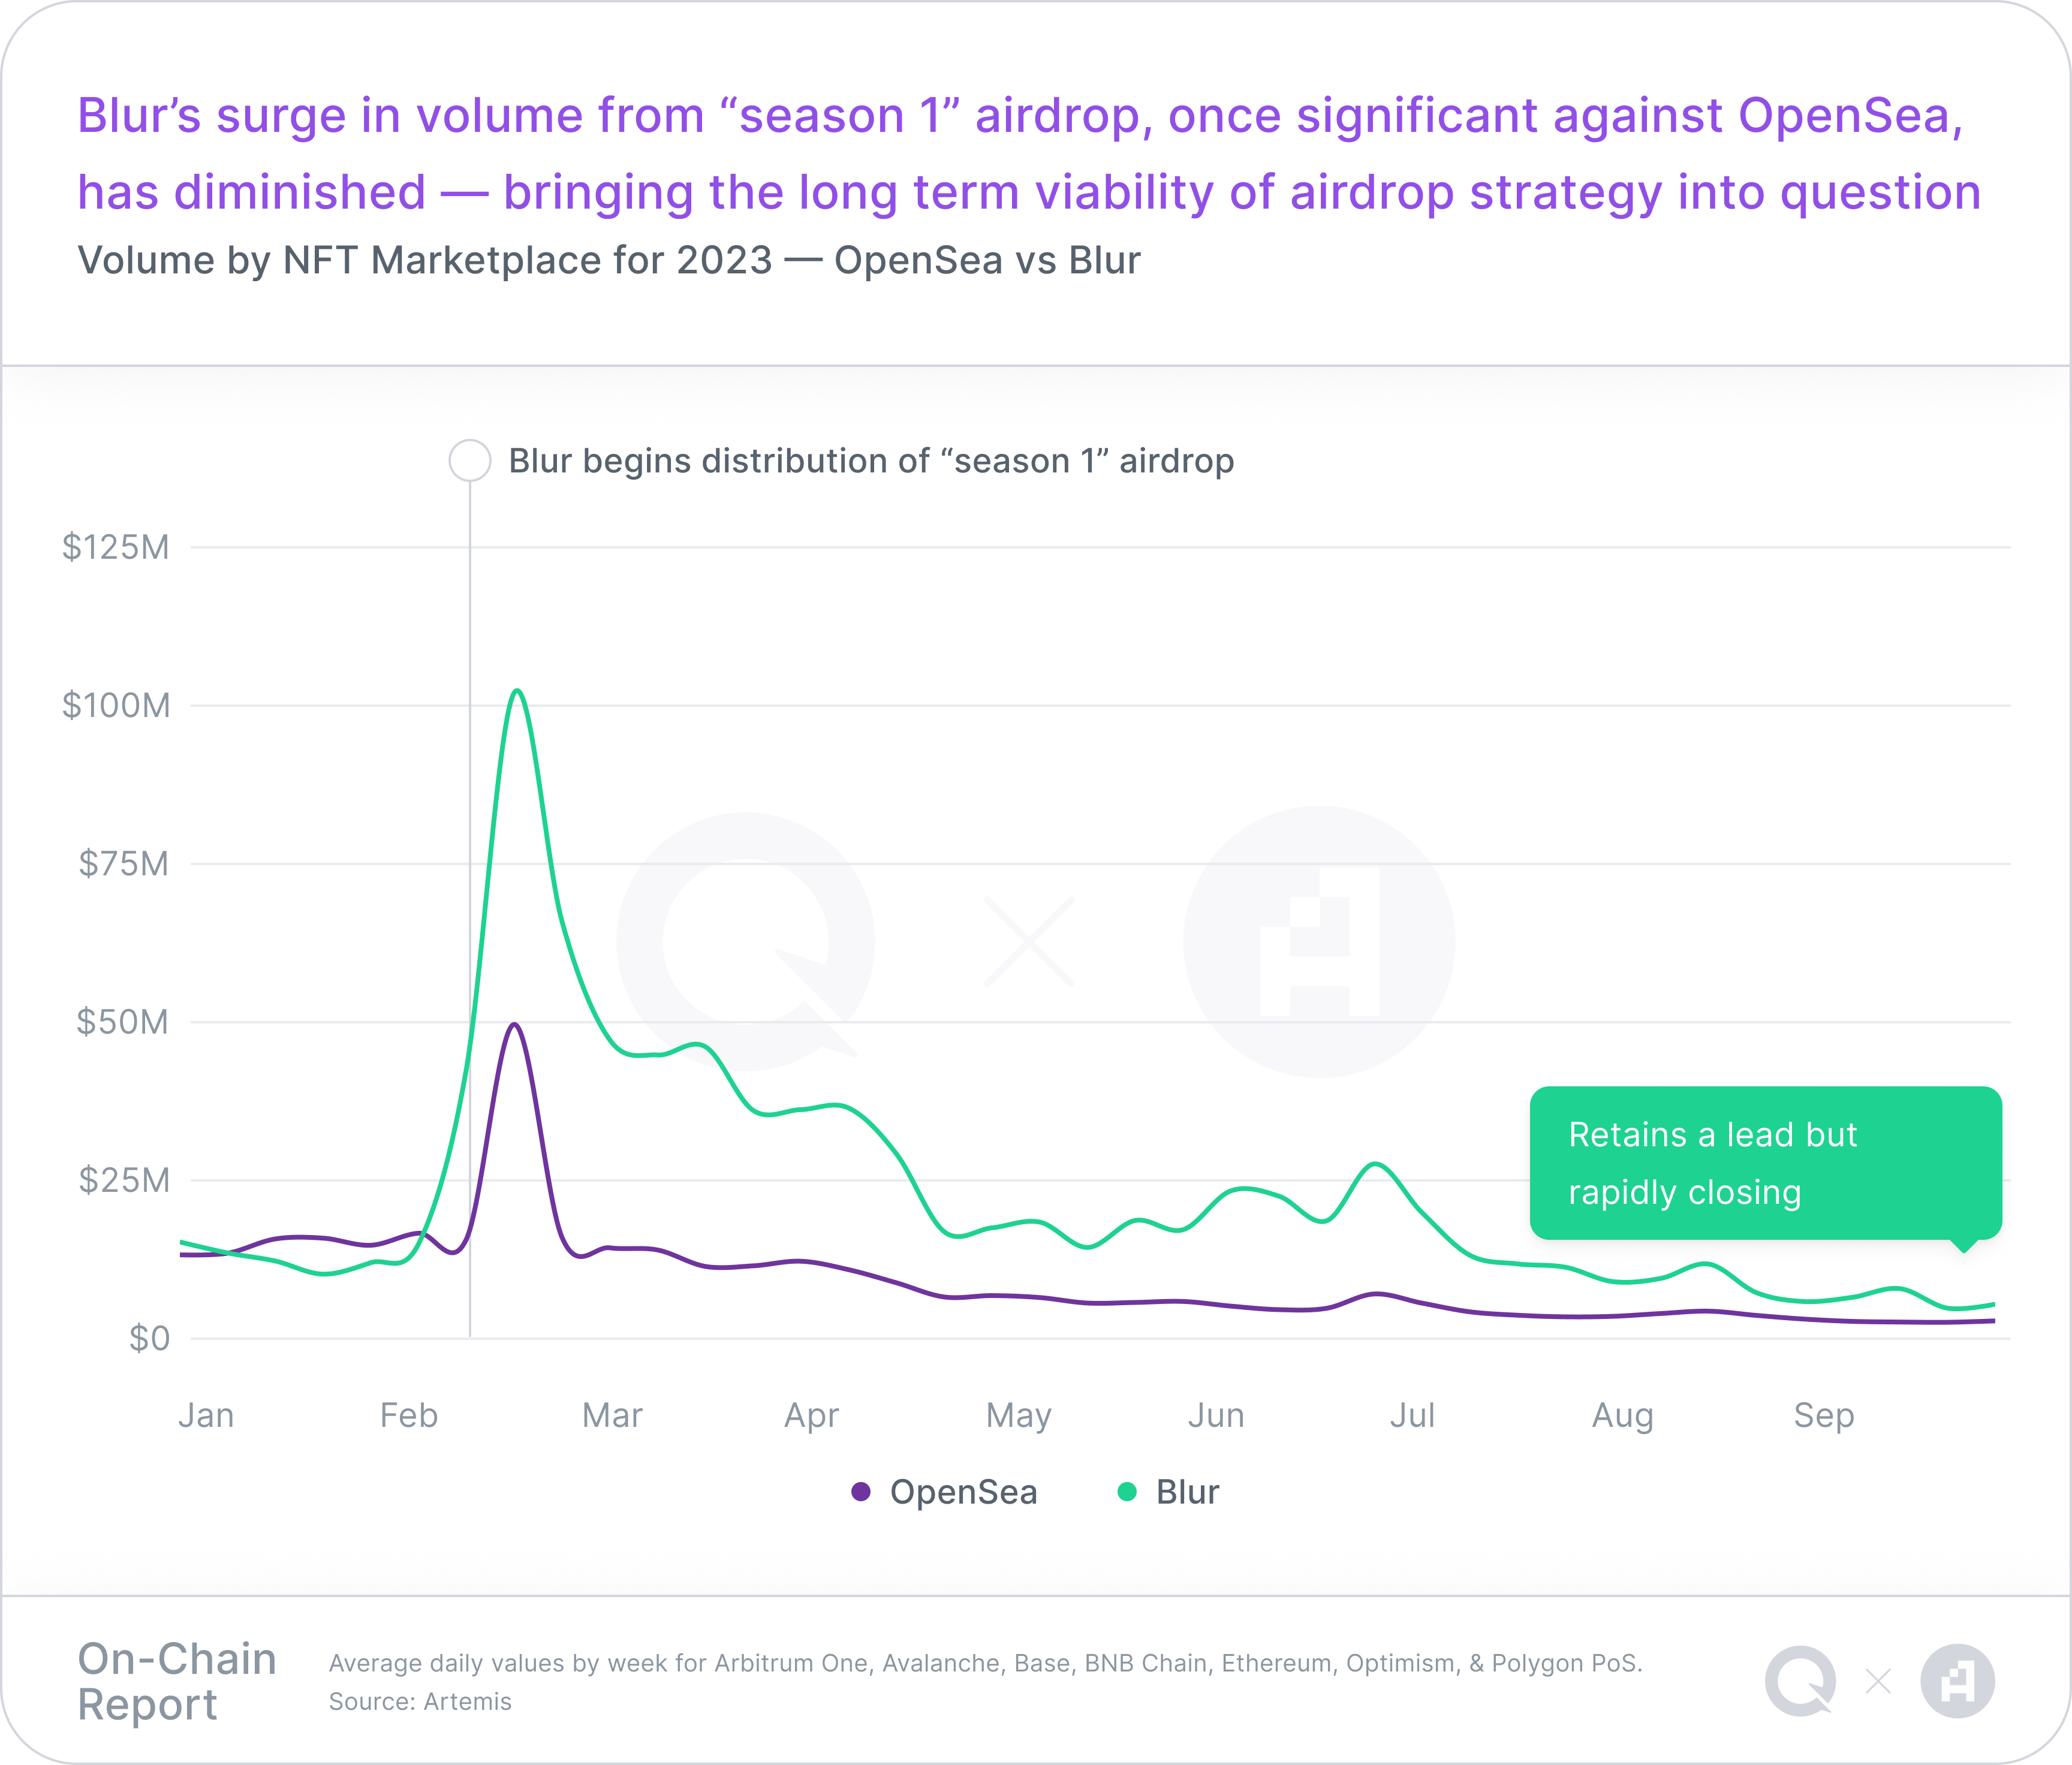 A chart representing Volume by NFT Marketplace for 2023 — OpenSea vs Blur, with a takeaway headline of "Blur’s surge in volume from “season 1” airdrop, once significant against OpenSea, has diminished — bringing the long term viability of airdrop strategy into question"